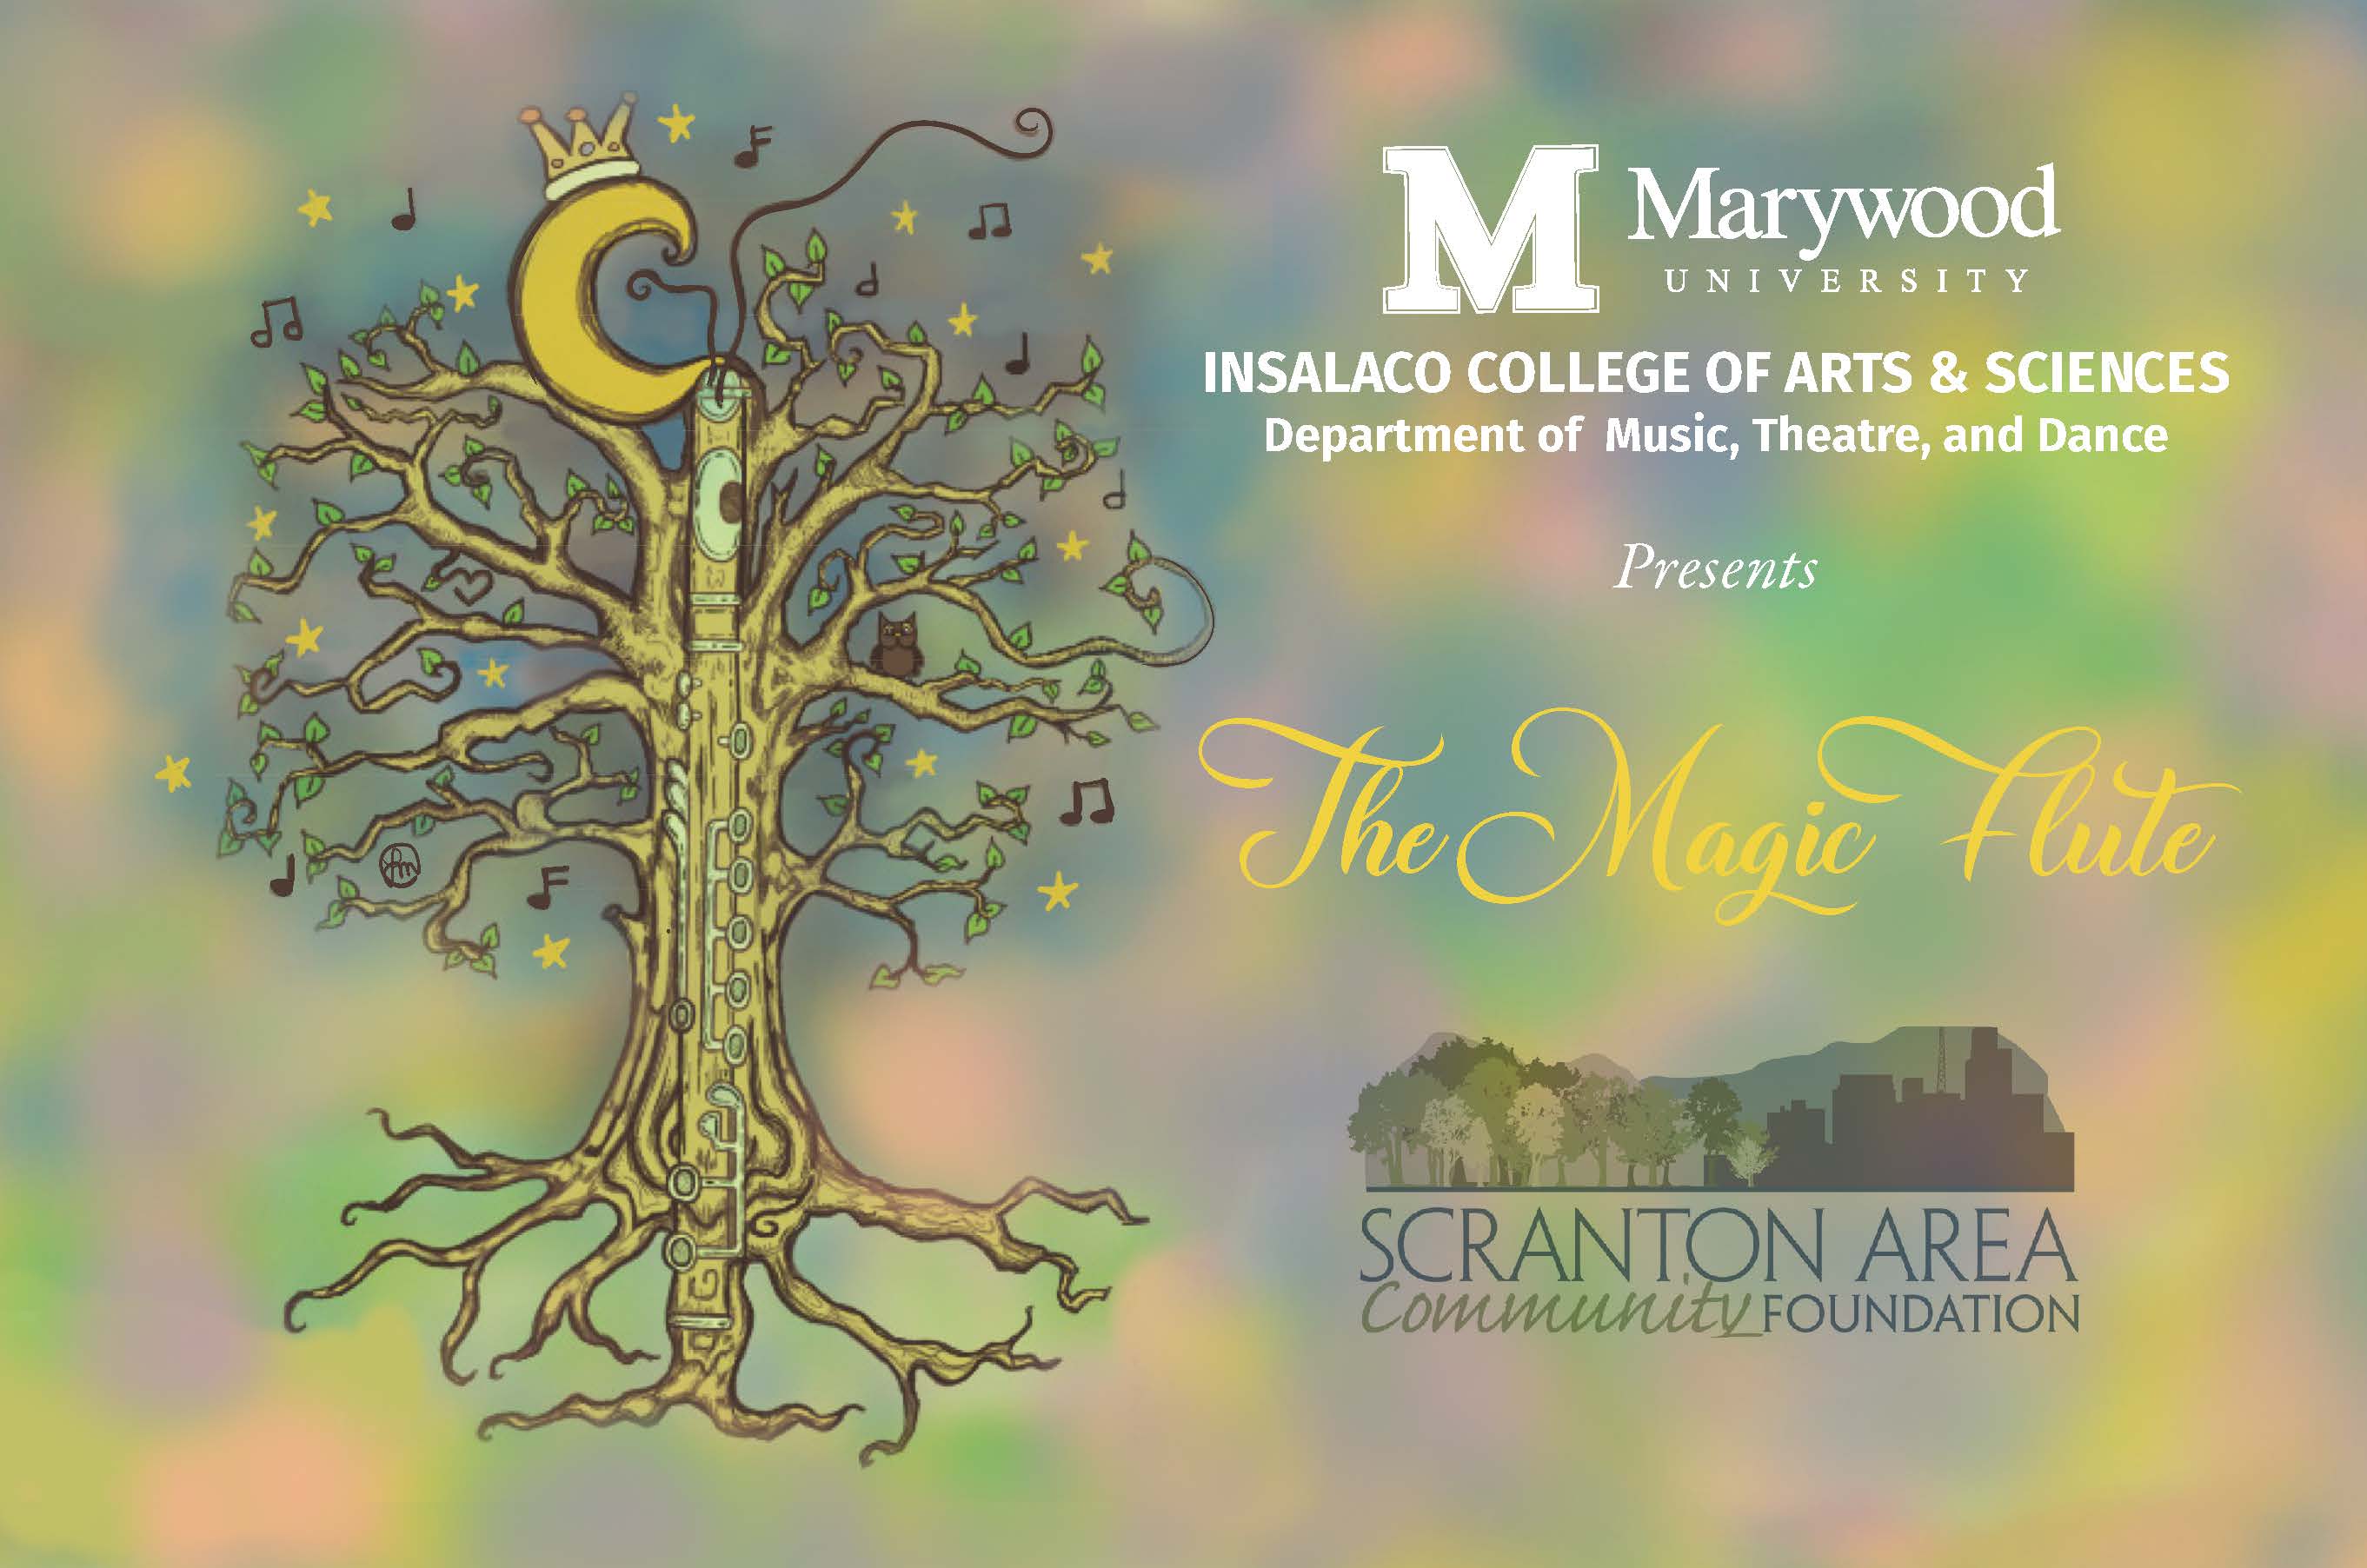 Marywood University’s Department of Music, Theatre, and Dance is collaborating with the School of Architecture in creating a full-scale production of Mozart's The Magic Flute.